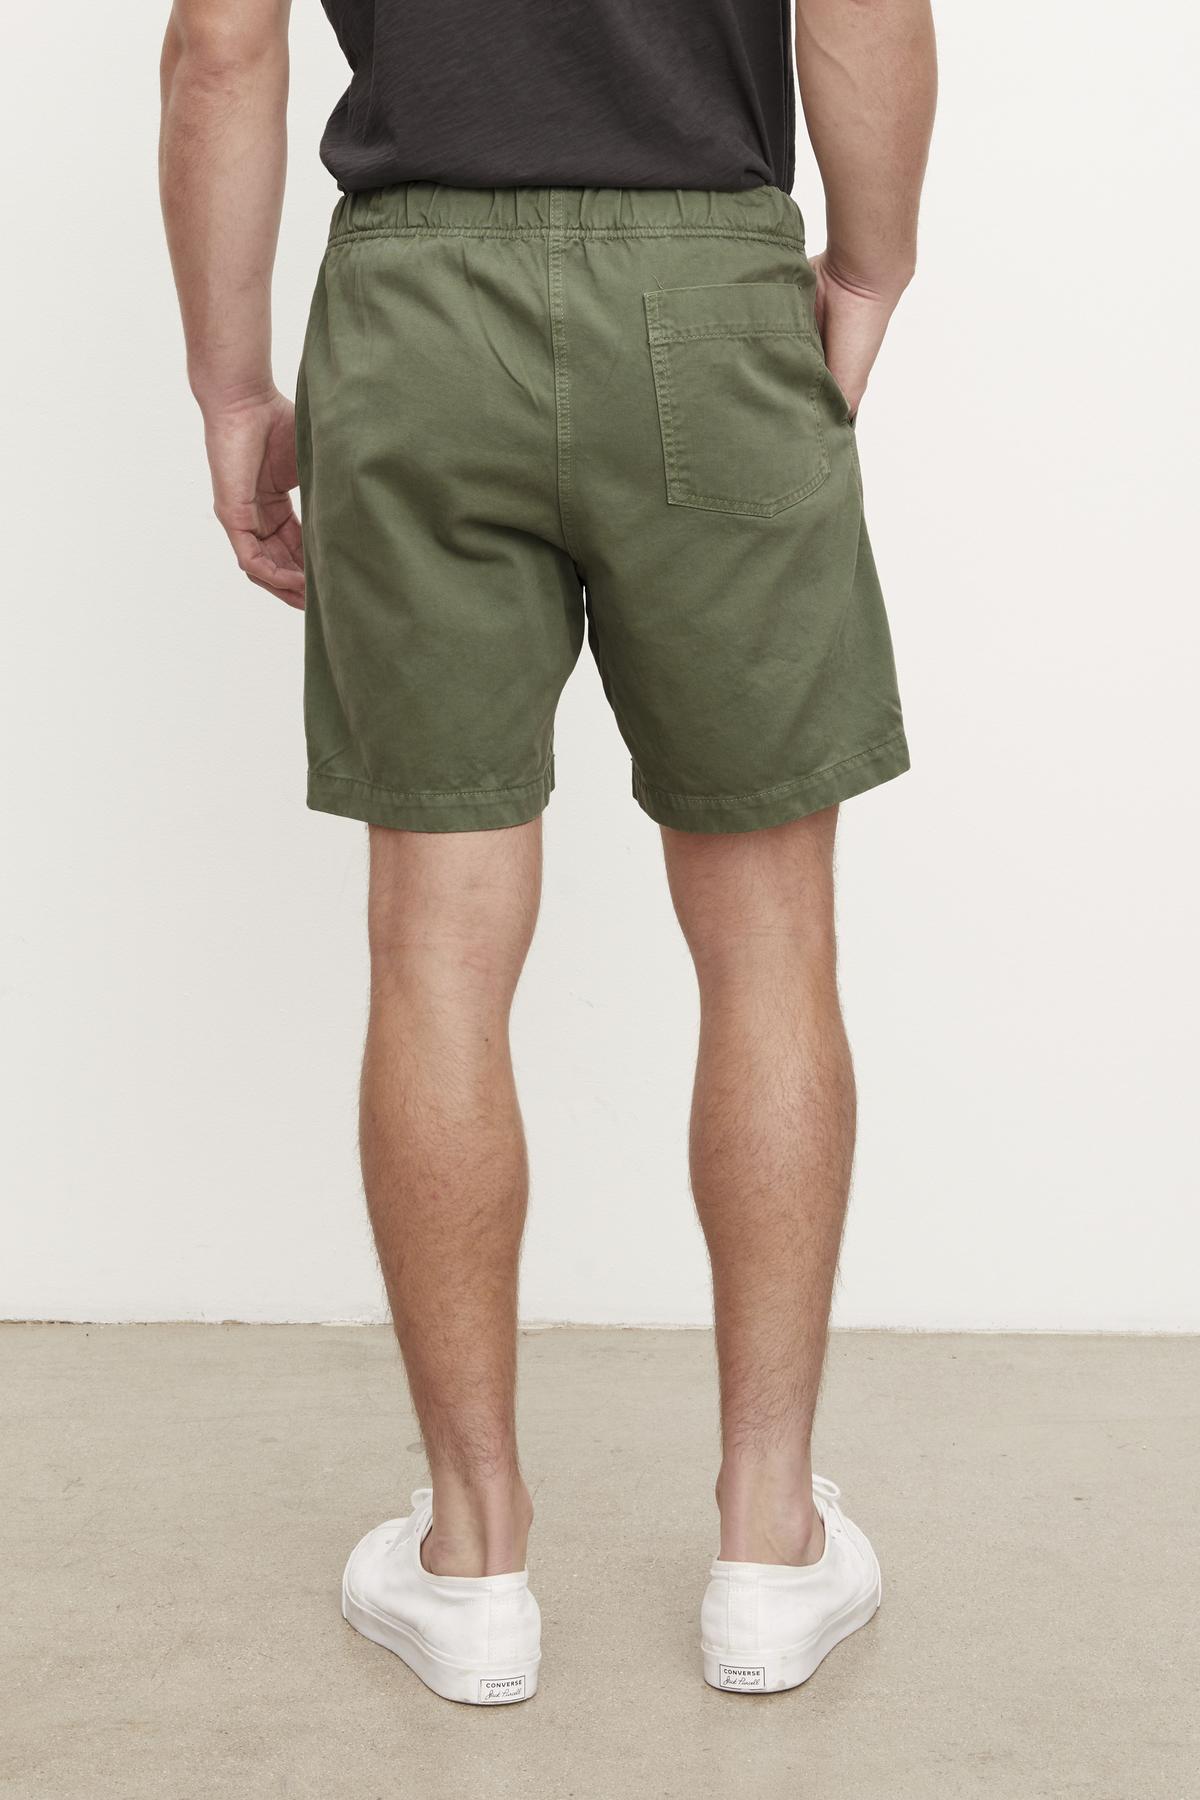   A man wearing Velvet by Graham & Spencer FIELDER SHORT in olive green cotton twill shorts and white sneakers standing with his back to the camera, indoors against a white wall. 